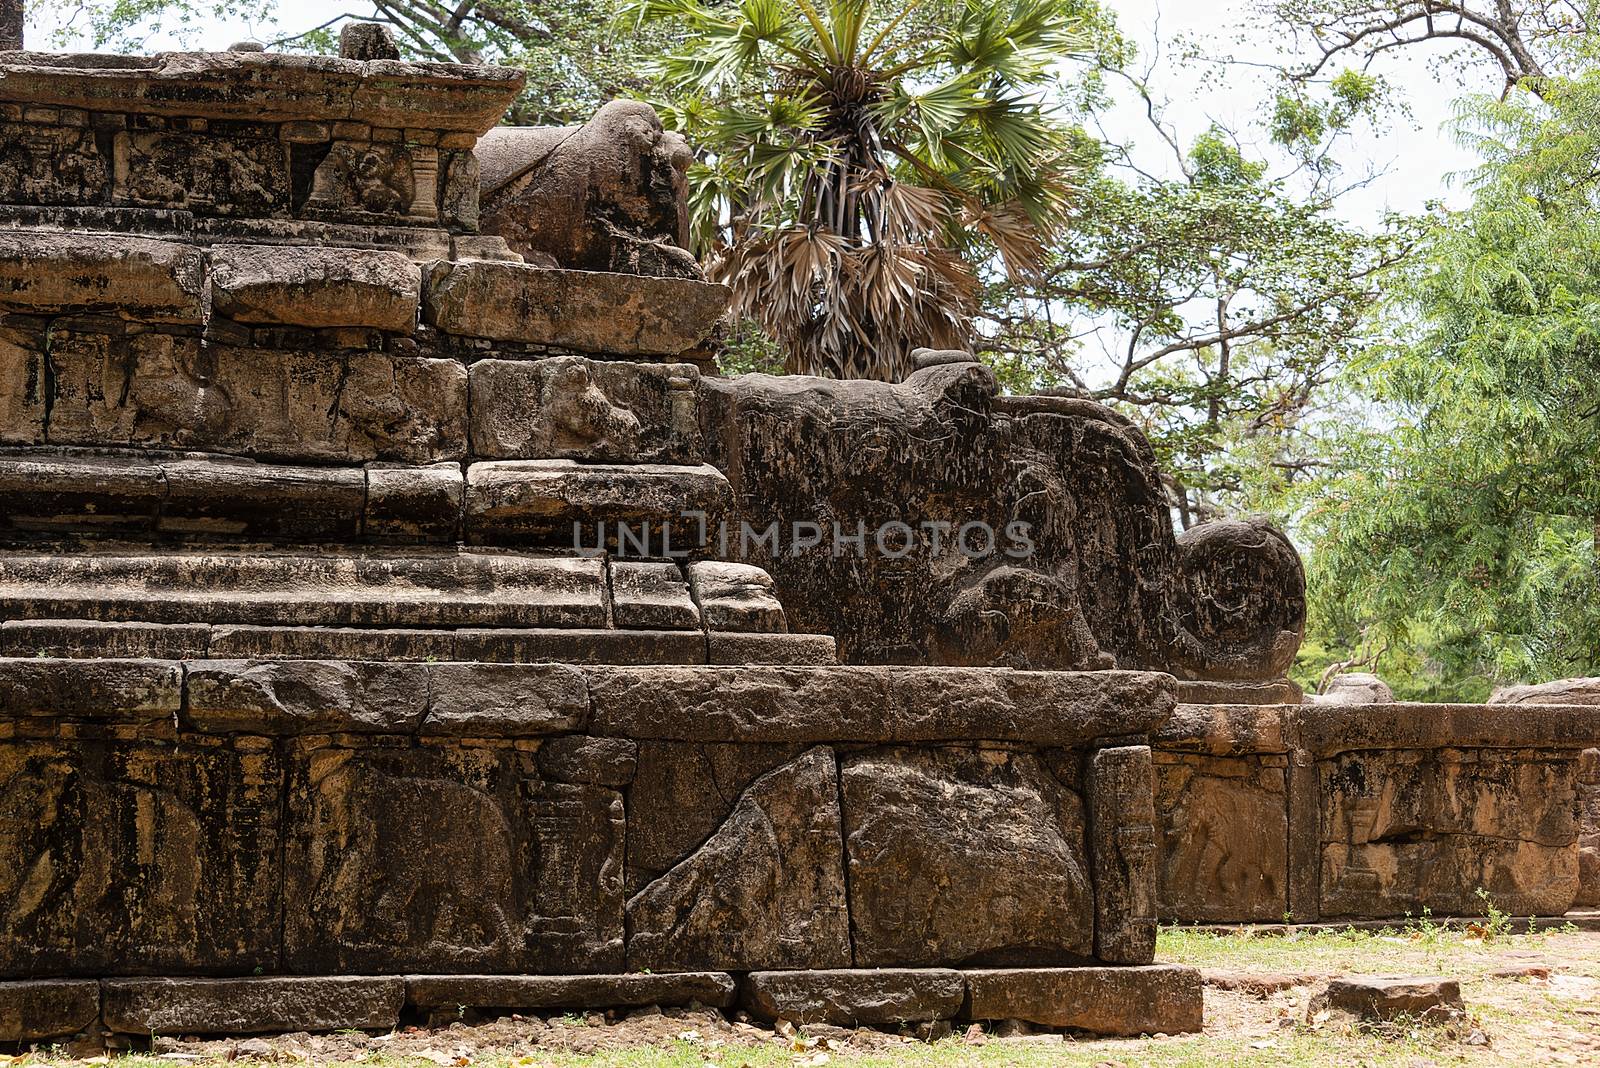 Polonnaruwa, Sri lanka, Sept 2015: Place ruins, reclaimed from the jungle. Polonnaruwa was established by the Cholas as capital city under the name Jananathapuram in the 10th century.